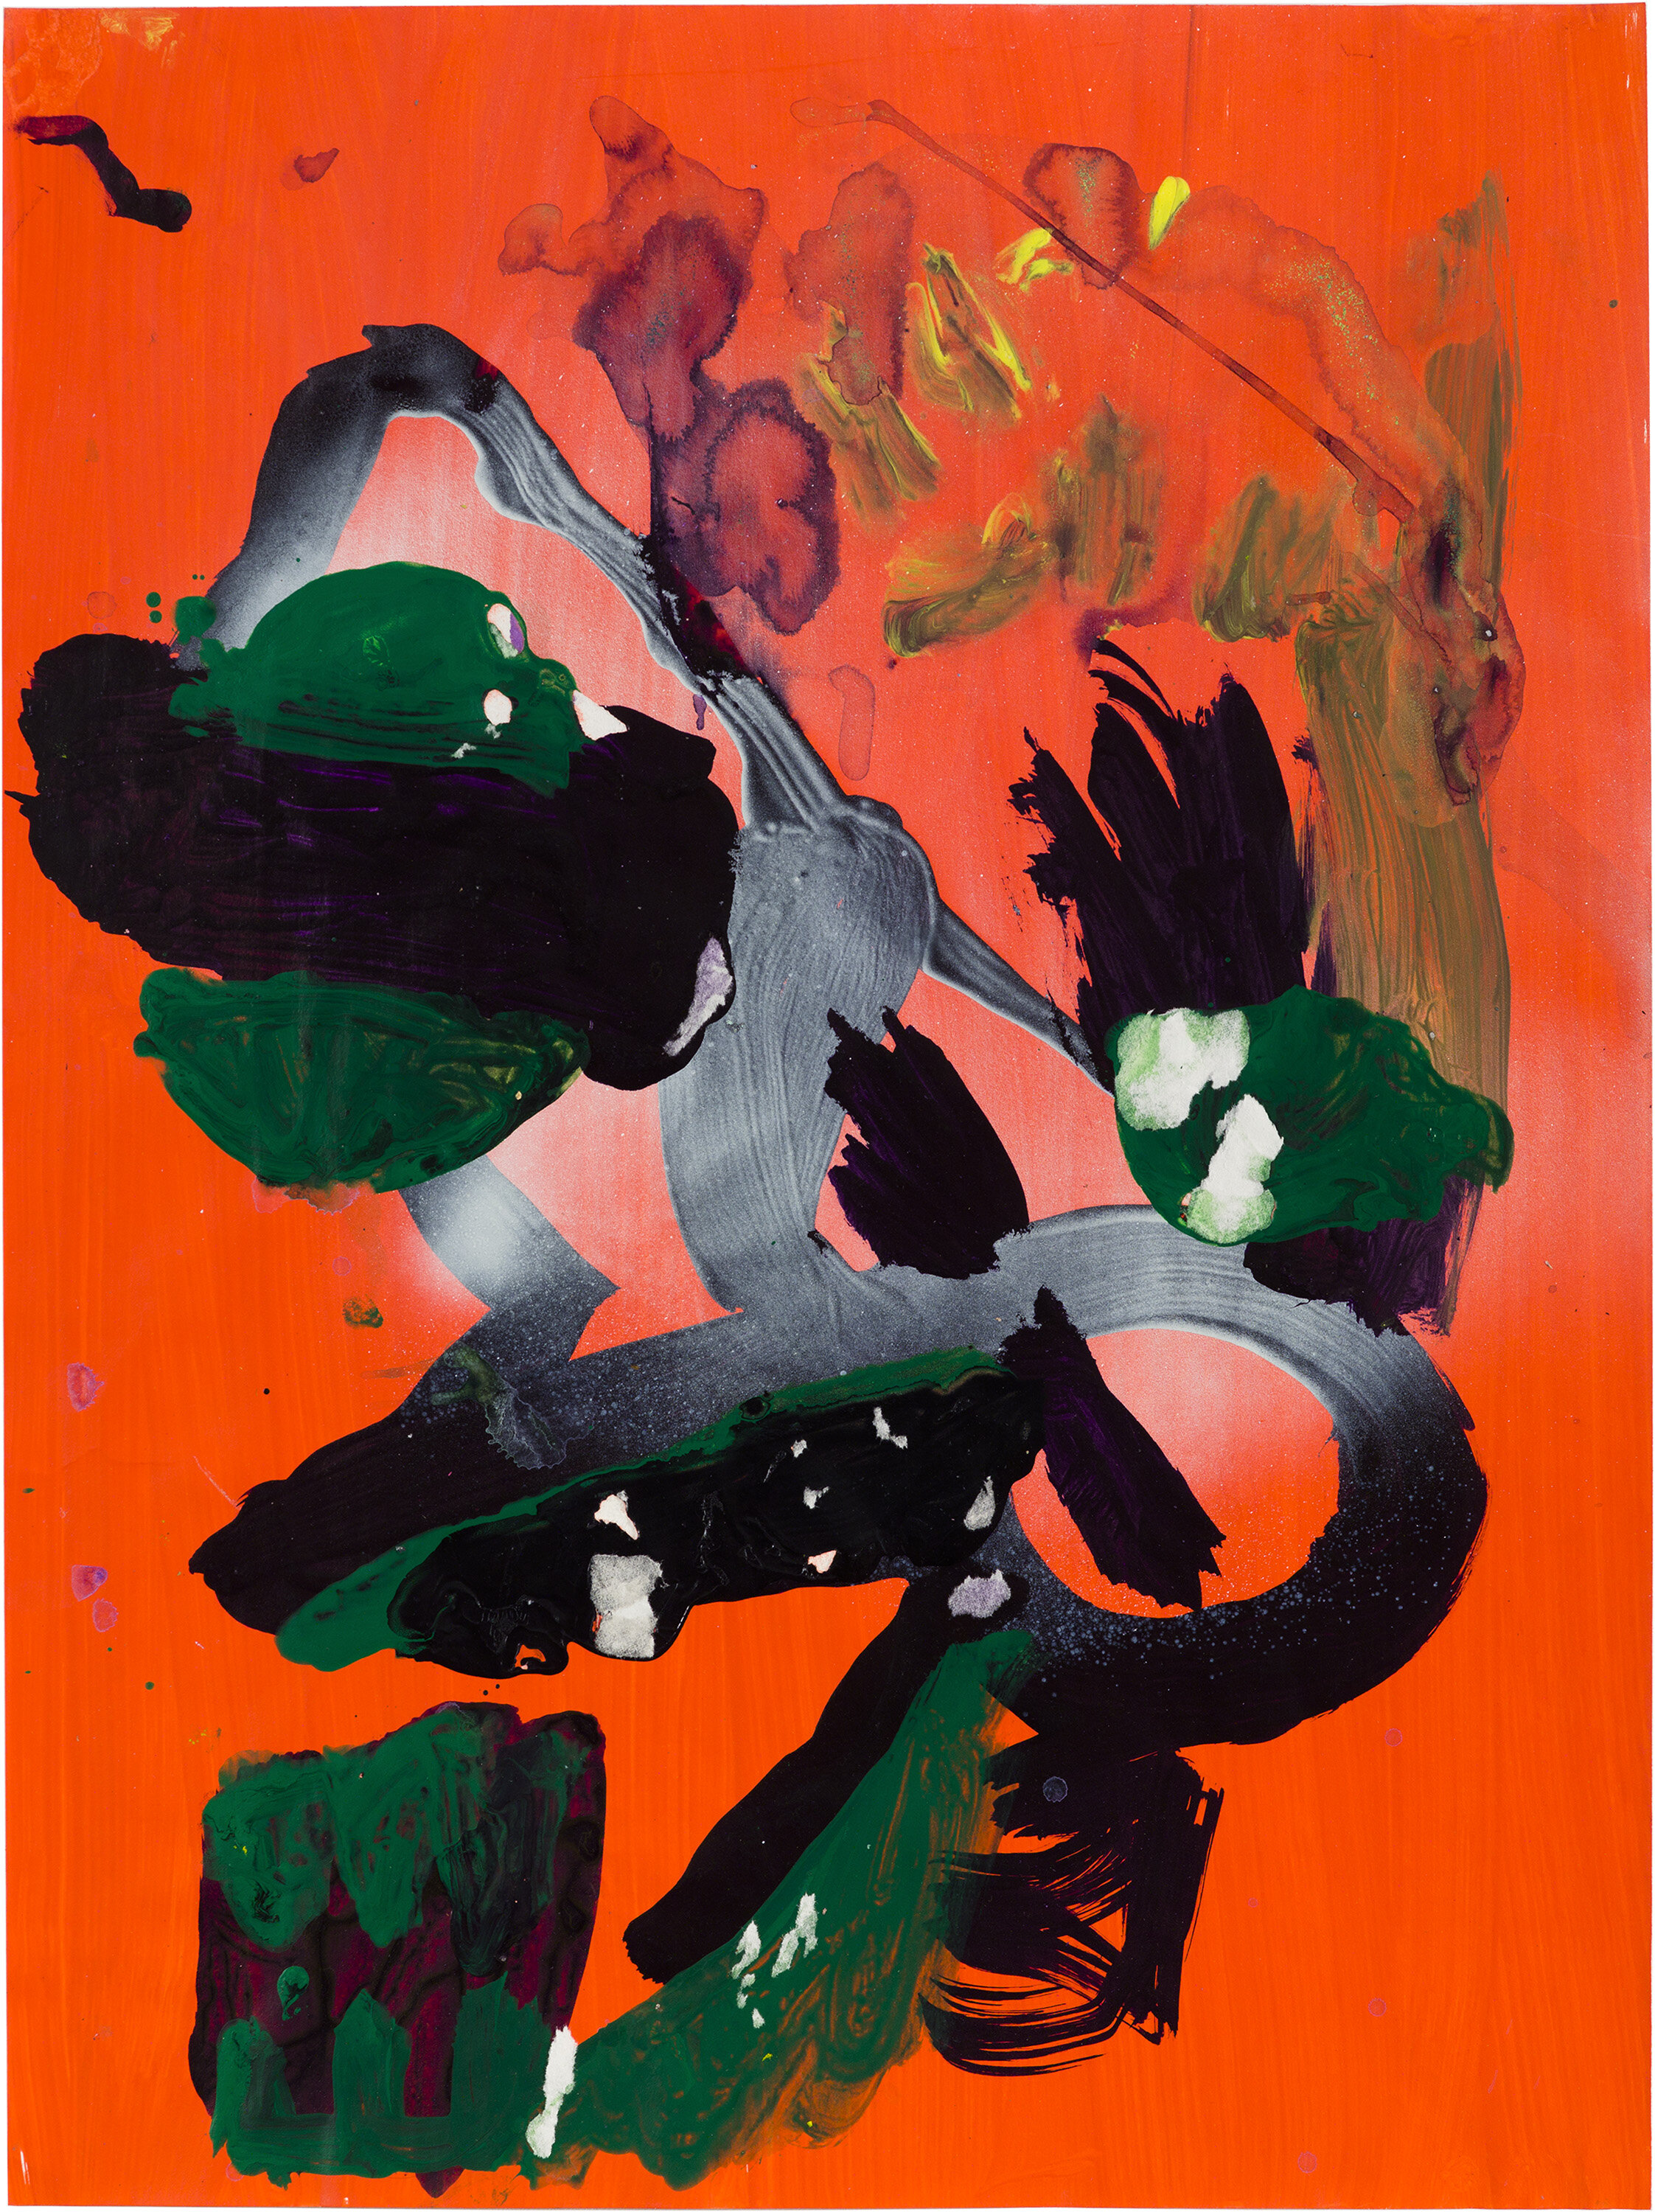  Drew Beattie and Ben Shepard   DBBS-DRW-2015-085   2015  acrylic and spray paint on paper  24 x 18 inches 